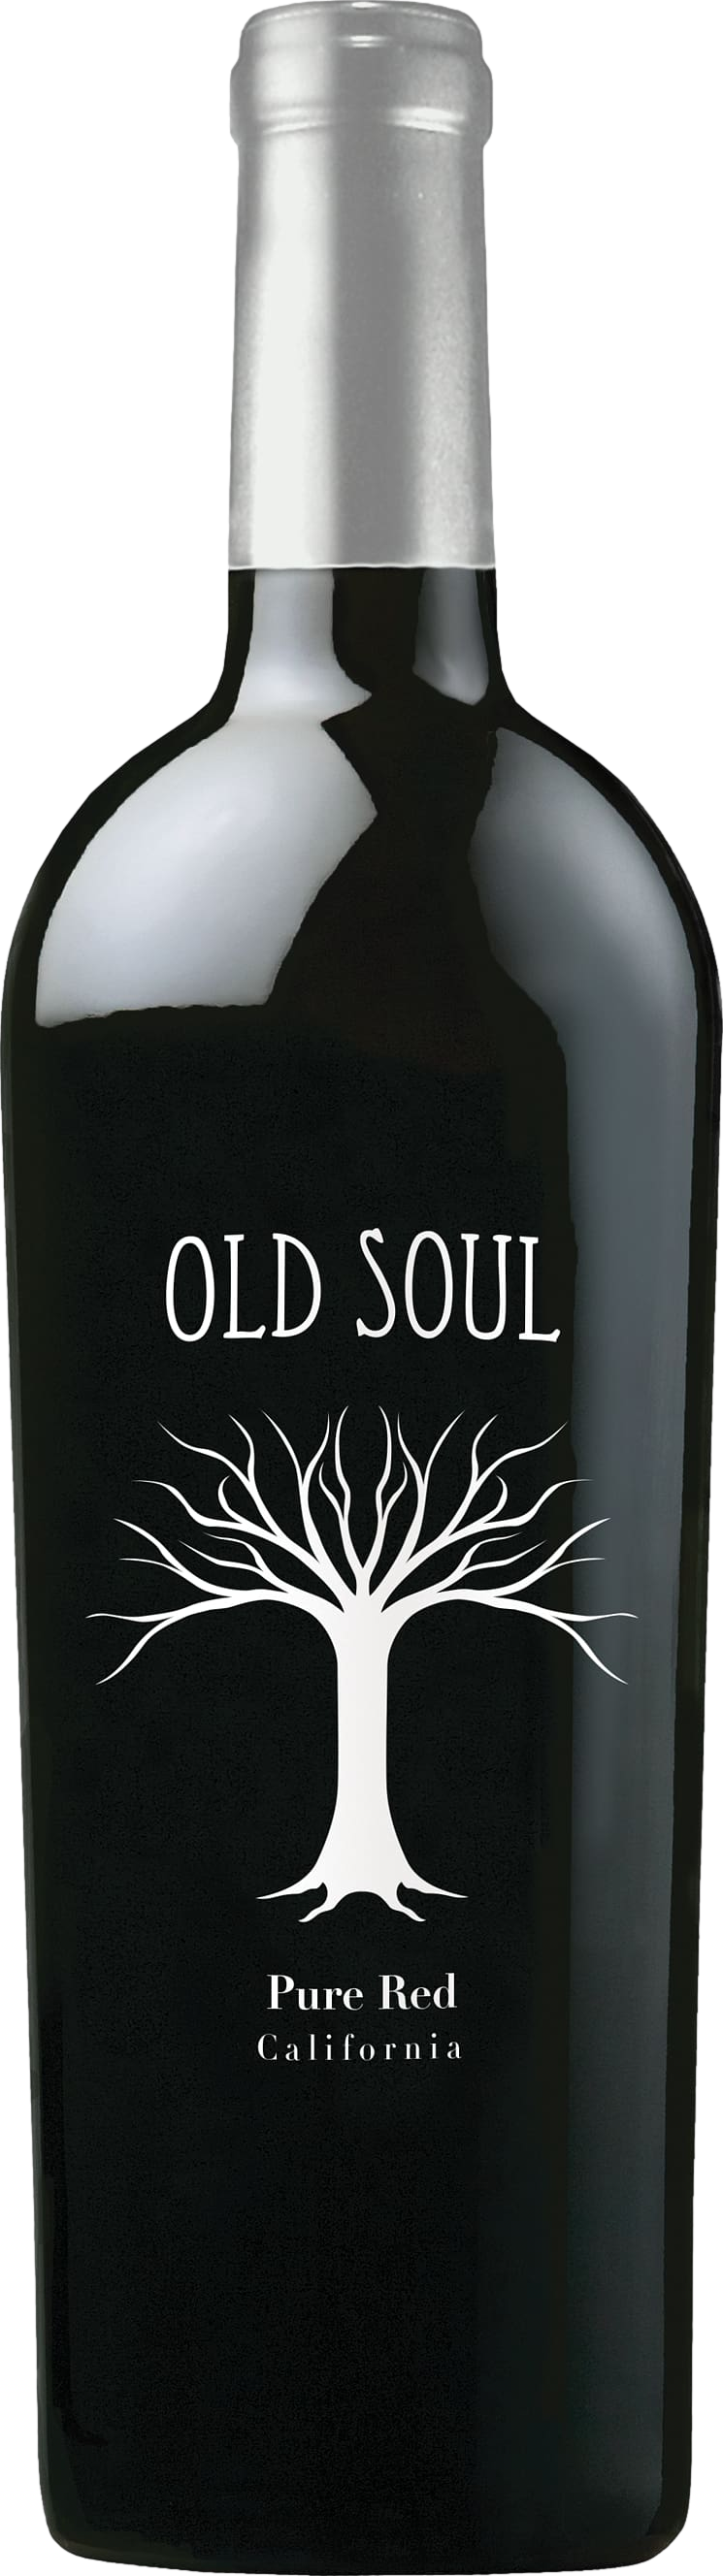 Old Soul Pure Red 2020 Old Soul 8wines DACH